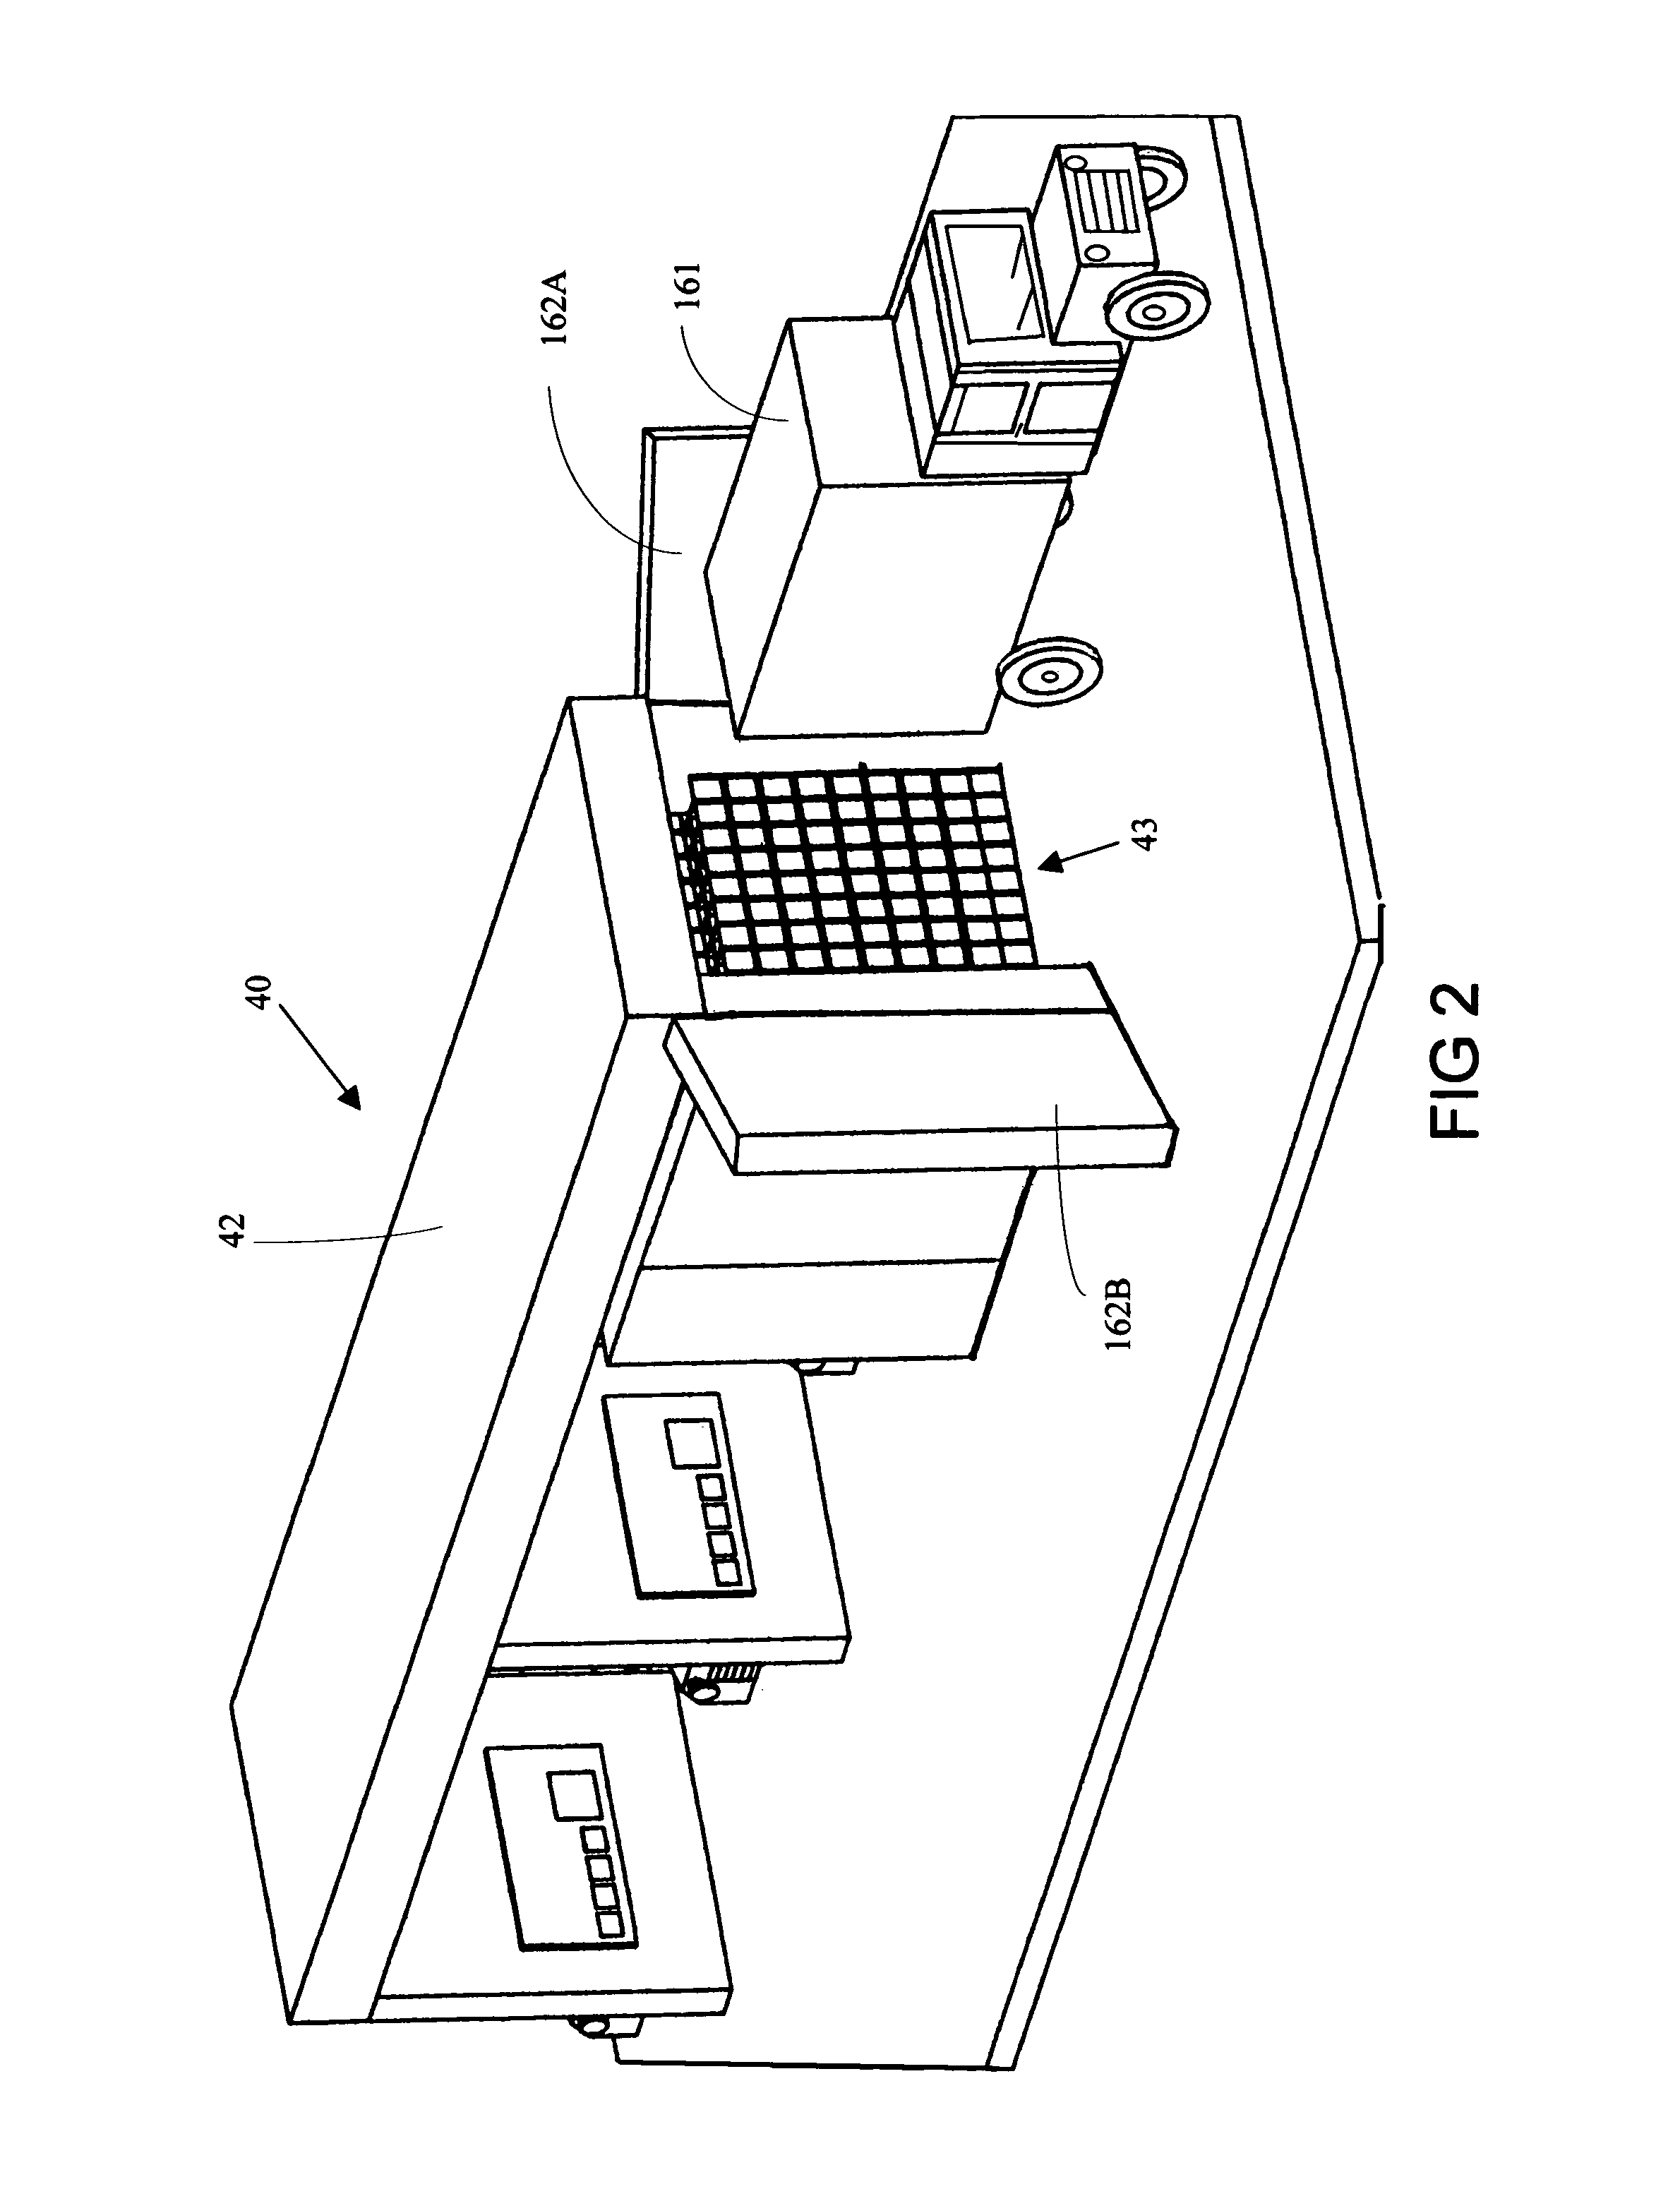 Automated 3-dimensional multitasking, stocking, storage, and distribution system